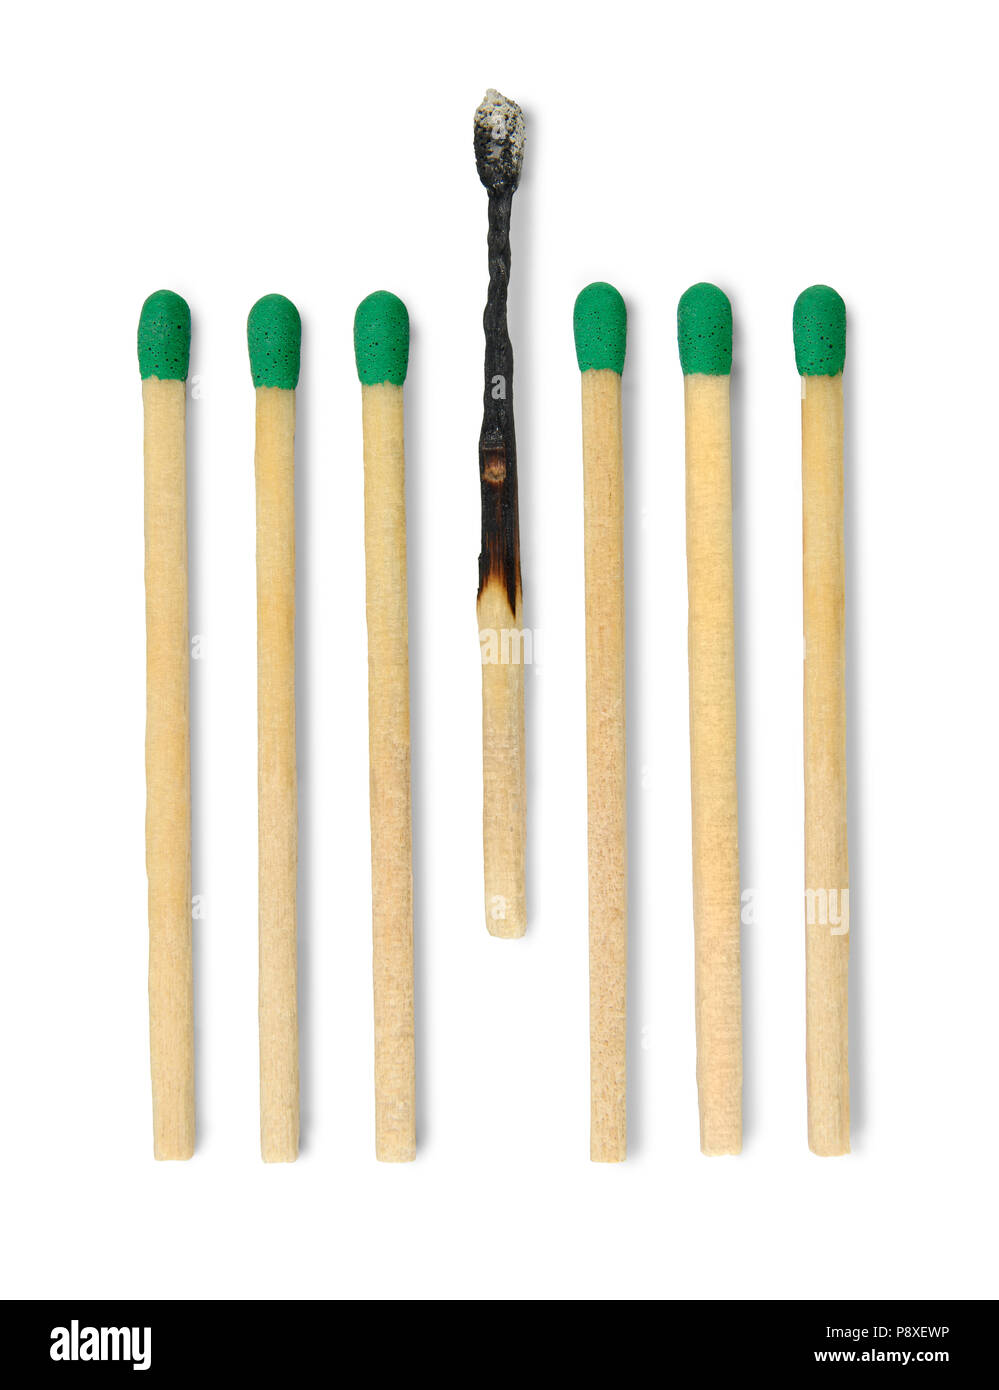 Seven matches one burnt in vertical position against white background. Stock Photo